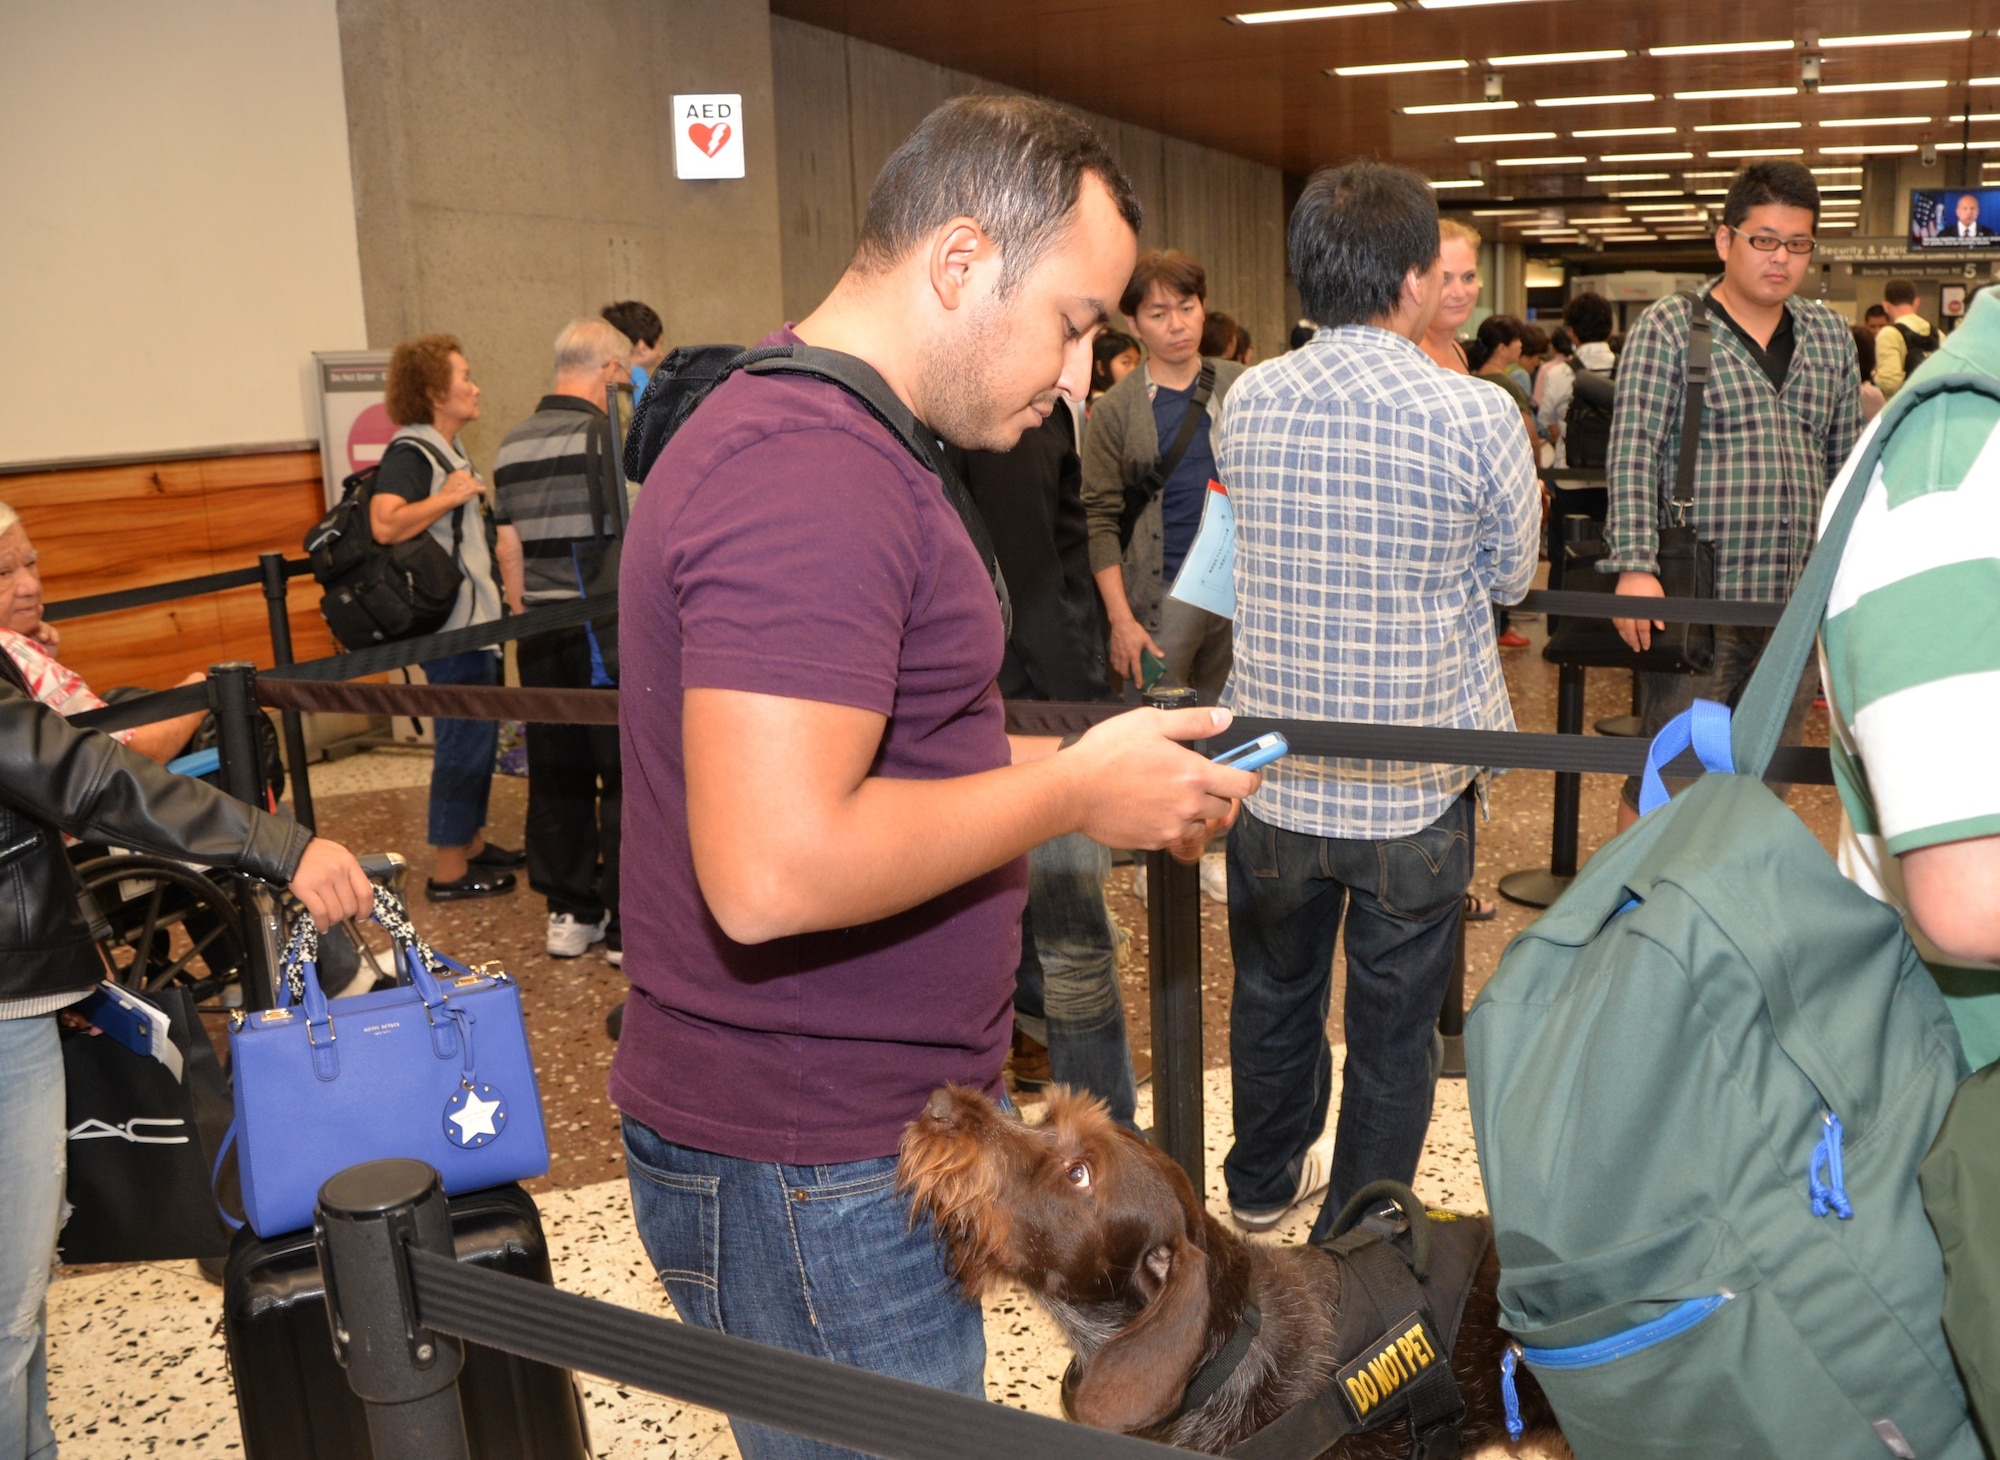 U.S. Air Force Staff Sgt. Jean Paul Zelaya-Rios, a member of the 624th Regional Support Group based out of Joint Base Pearl Harbor-Hickam, Hawaii, participates in a training scenario for Brute, a TSA explosive detection dog, who is sniffing around to locate the traveling passenger carrying explosive material through the security line at the Honolulu International Airport, Hawaii, Nov. 16, 2016. Located on Oahu and Guam, and a component of the Air Force Reserve, the 624th RSG's mission is to deliver mission essential capability through combat readiness, quality management and peacetime deployments in the Pacific area of responsibility.(U.S. Air Force photo by Master Sgt. Theanne Herrmann)